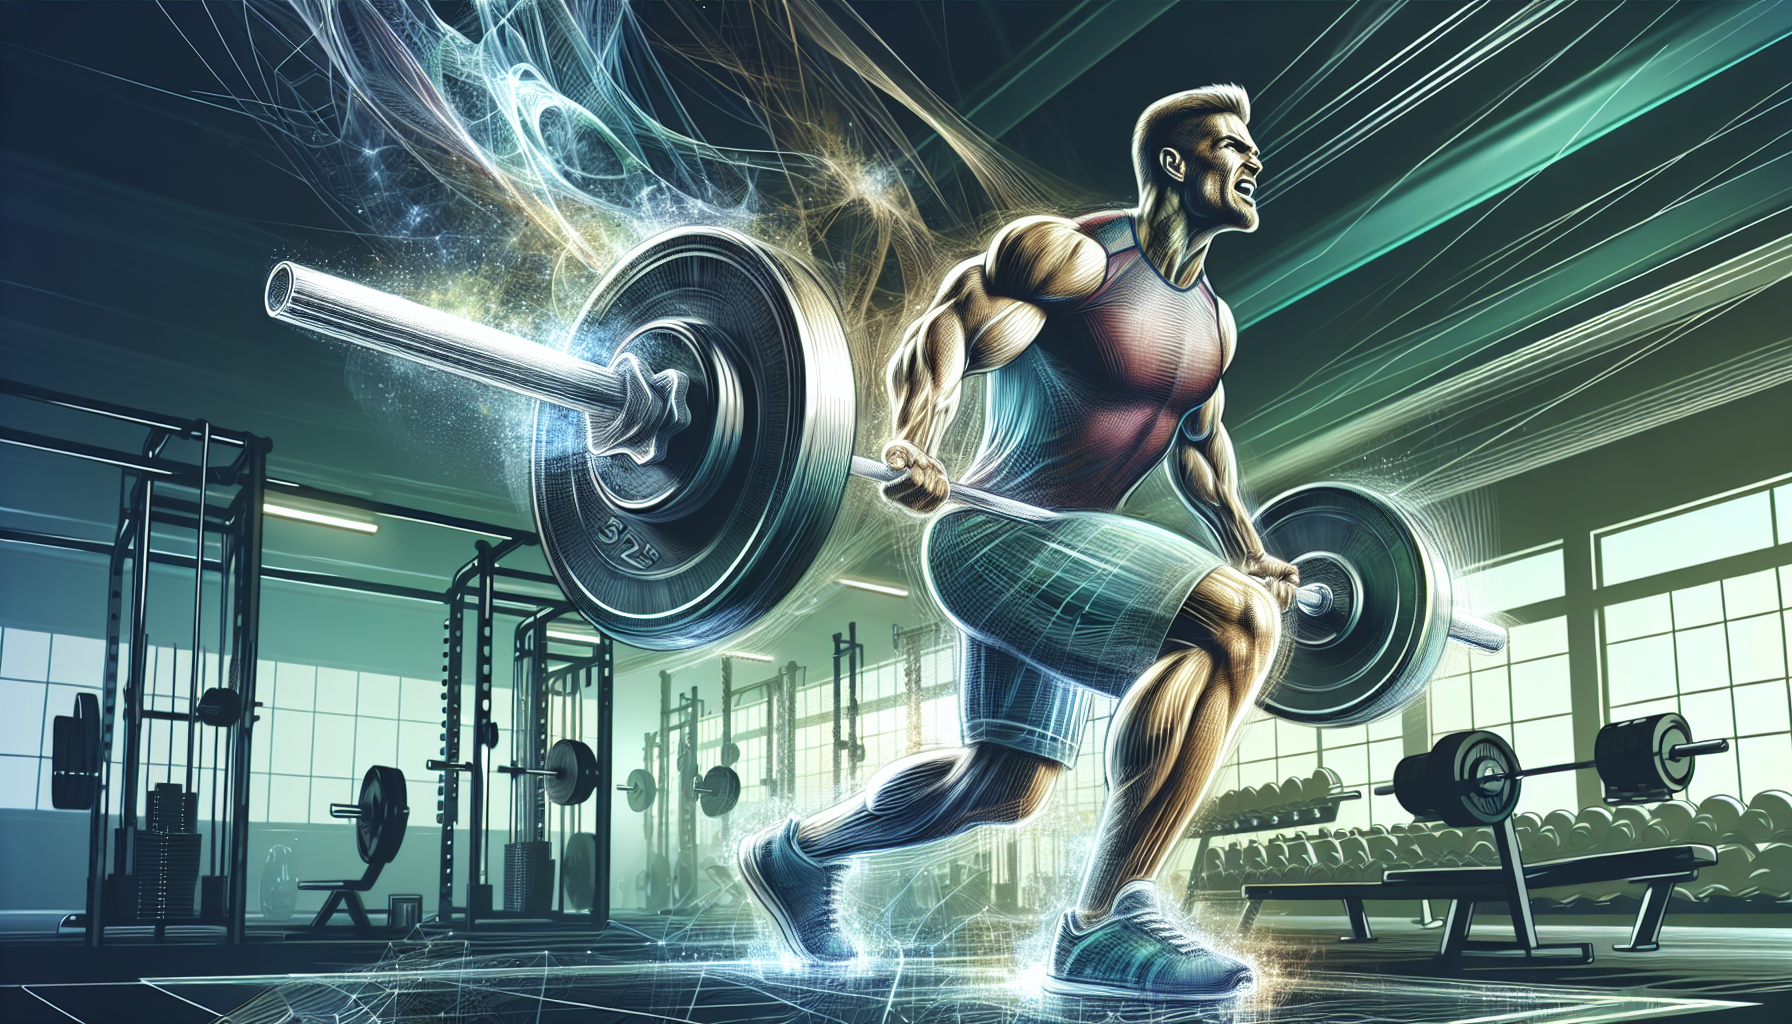 Illustration of a person lifting weights in a gym